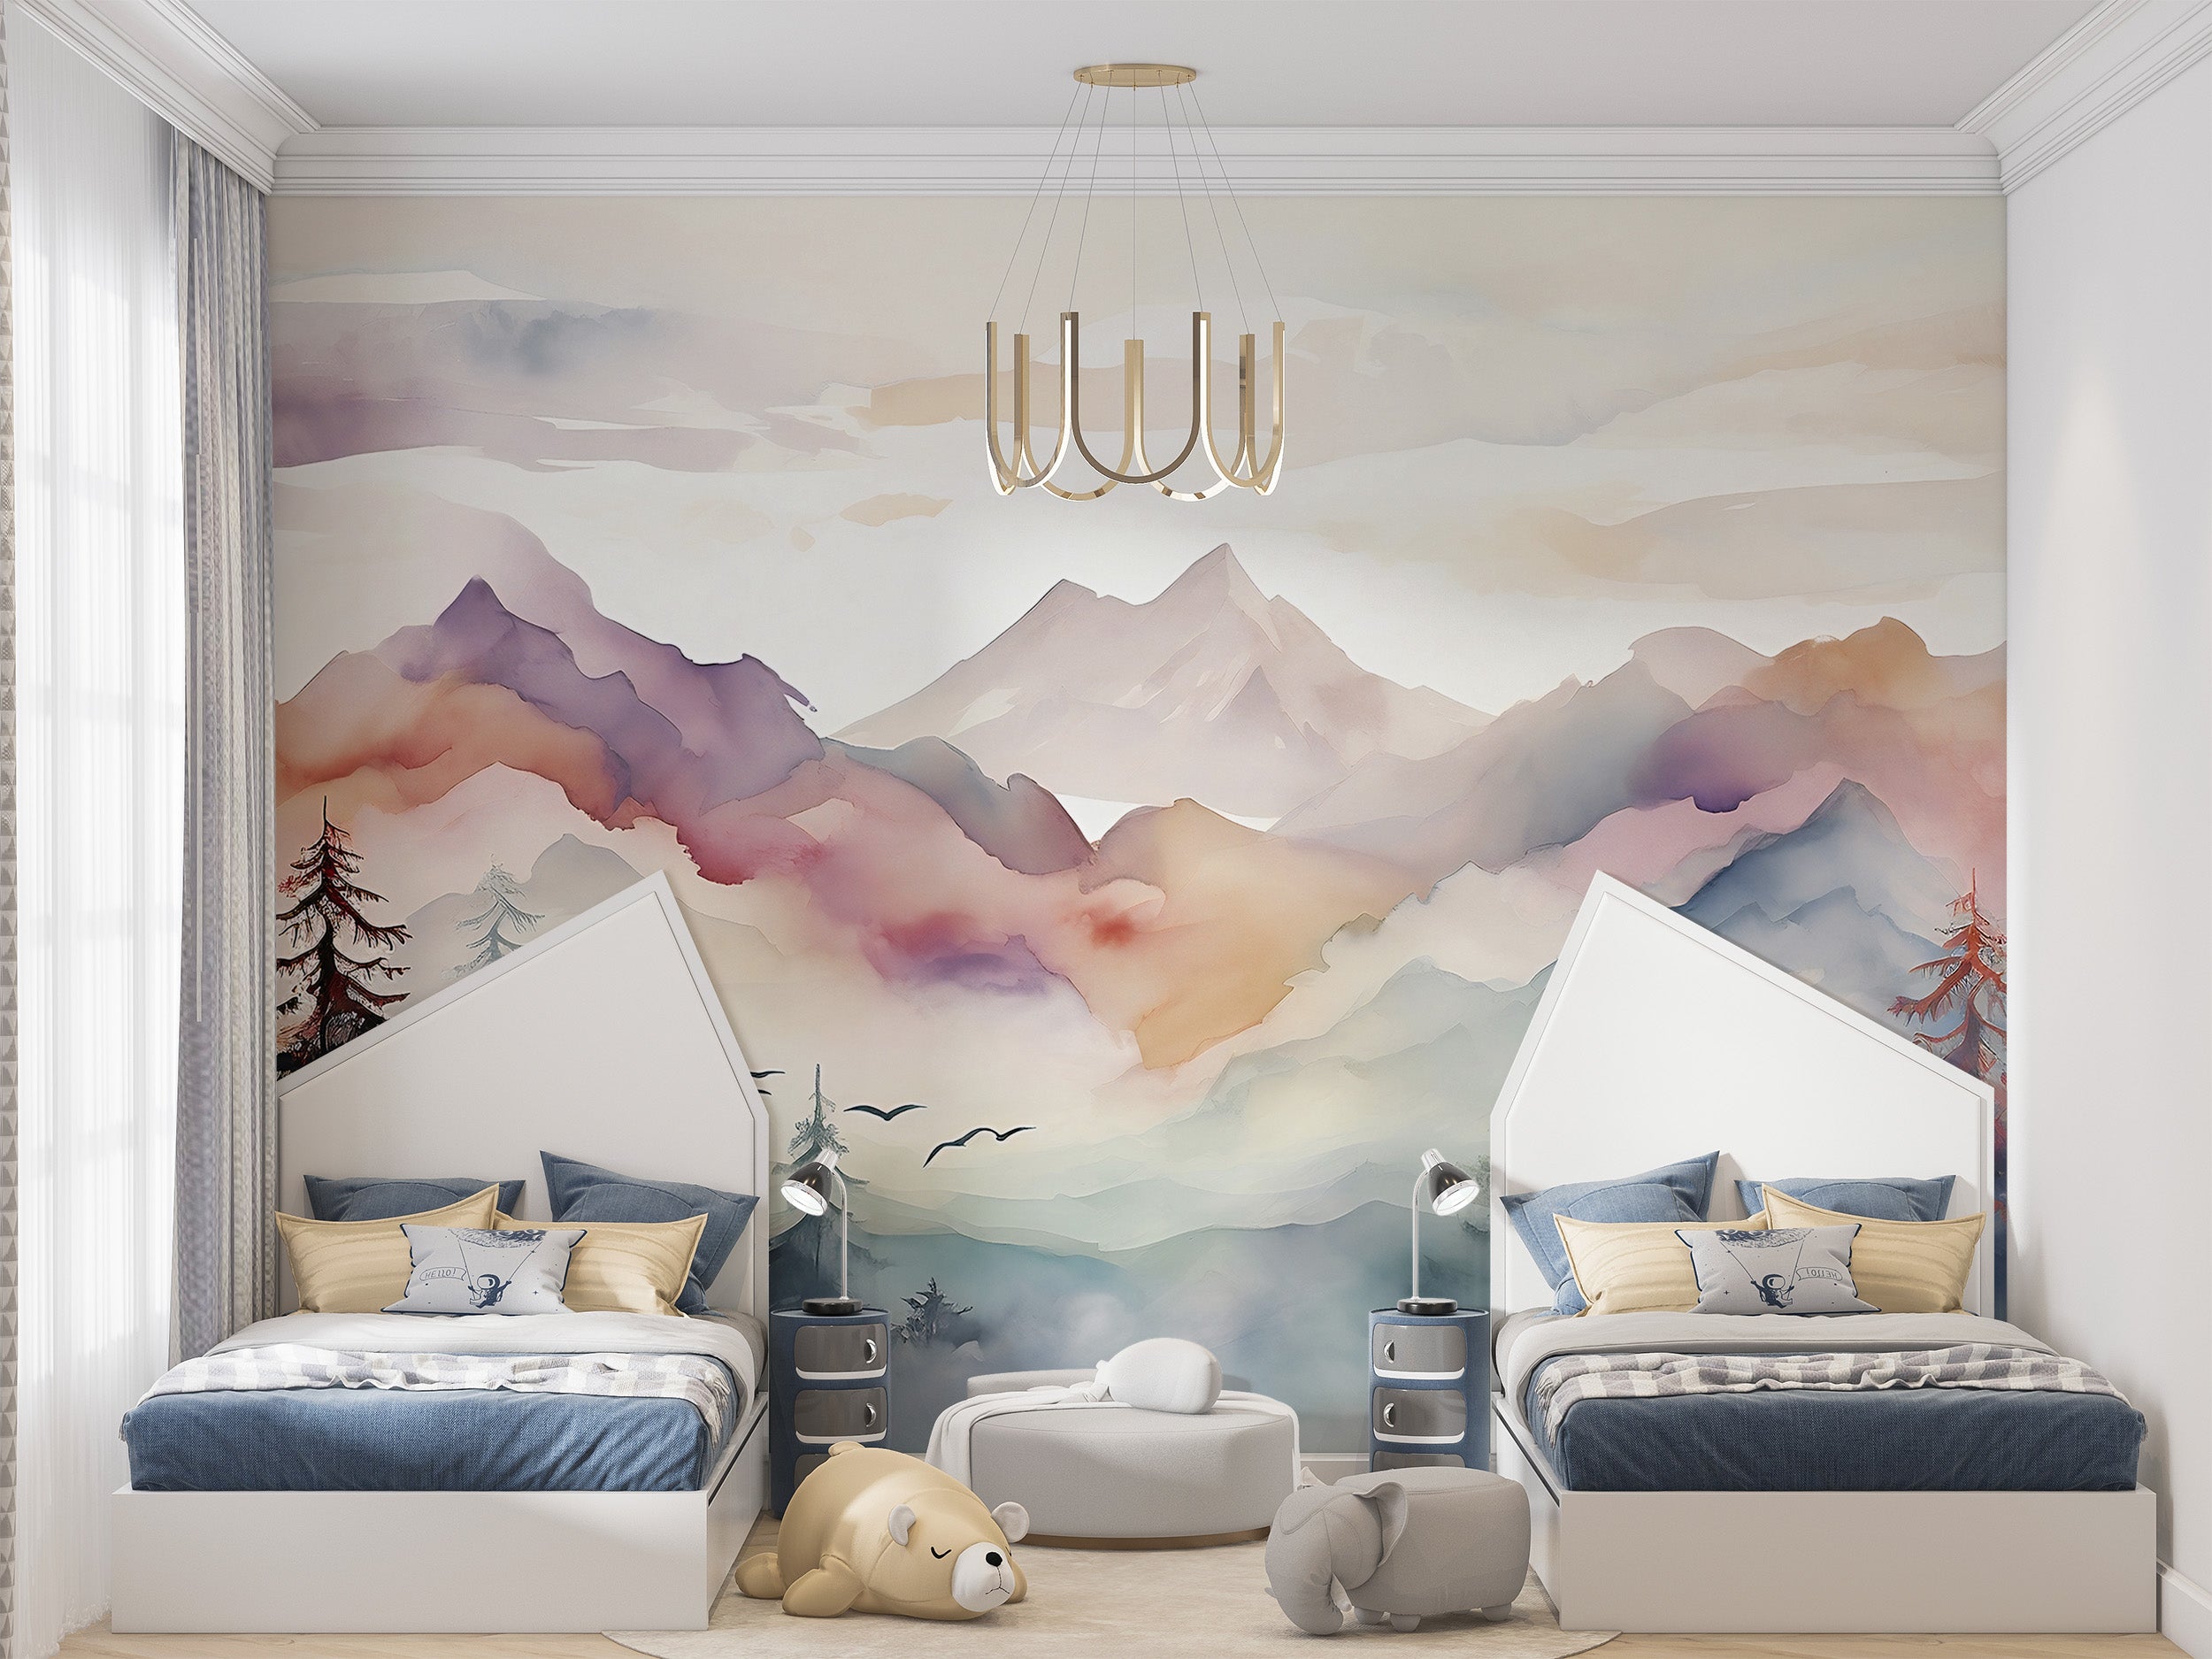 Effortless Application of Colorful Mountain Wall Art